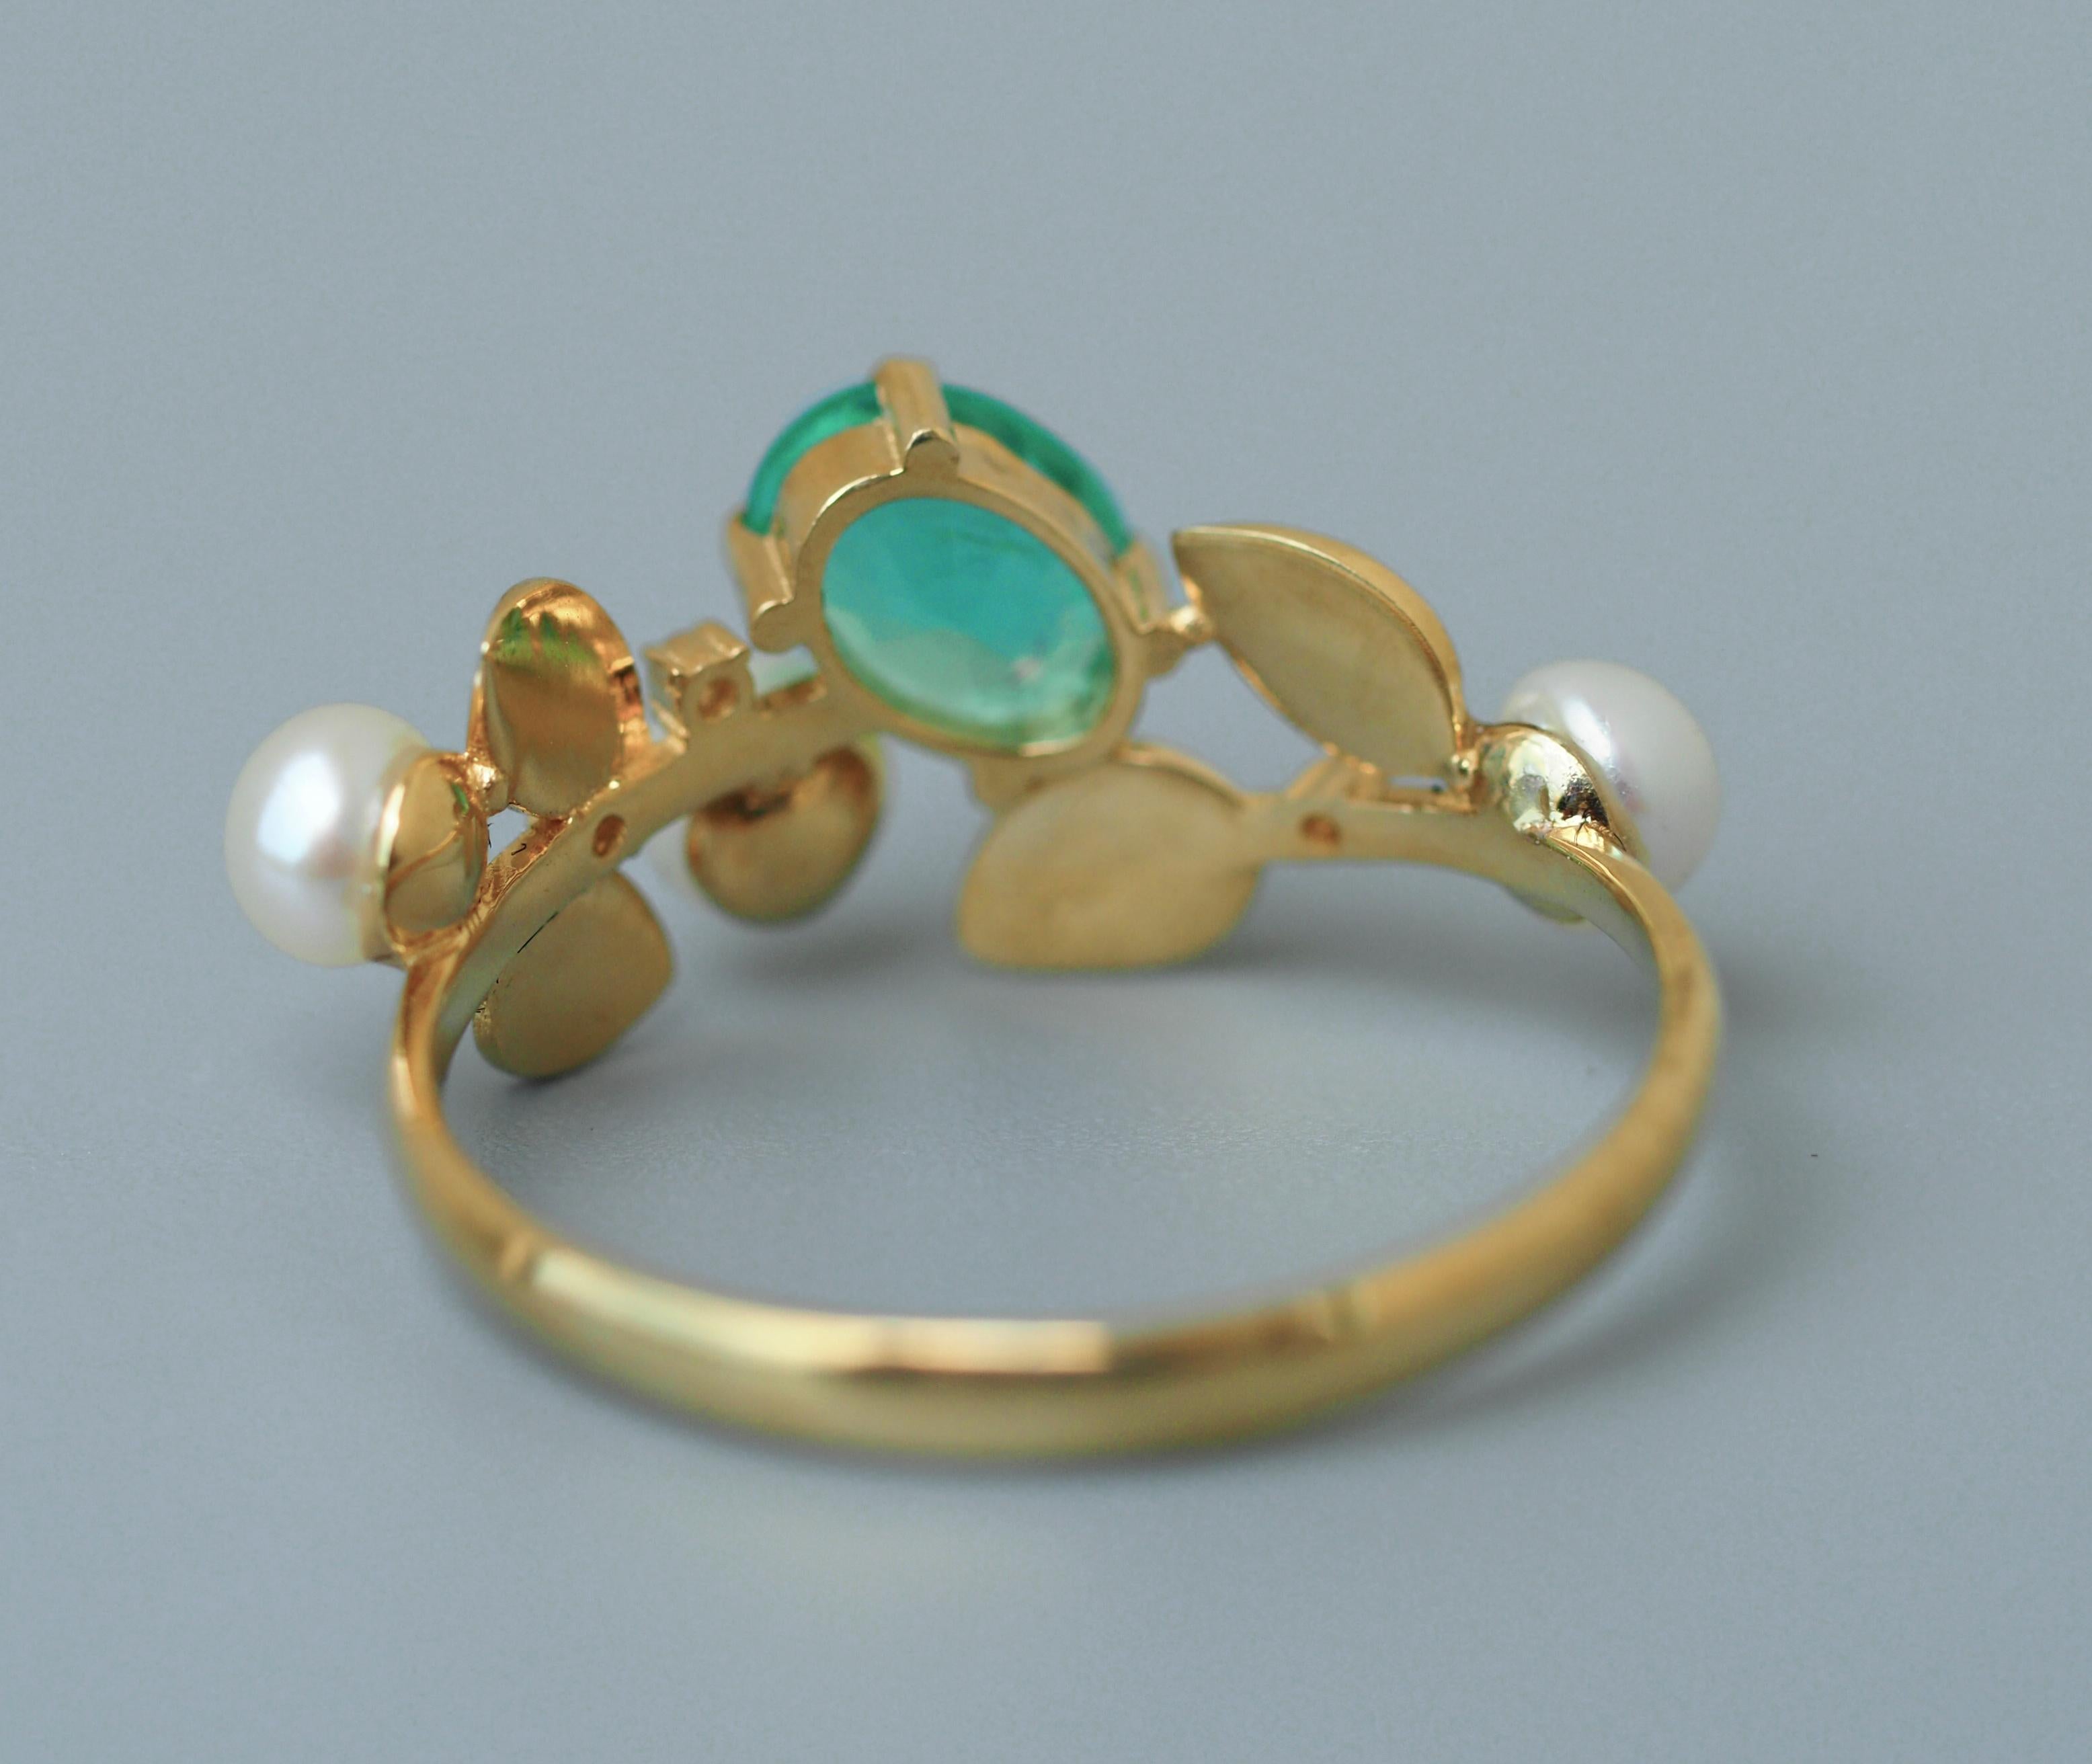 Women's 14k Gold Floral Ring with Oval Apatite, Diamonds and Pearls